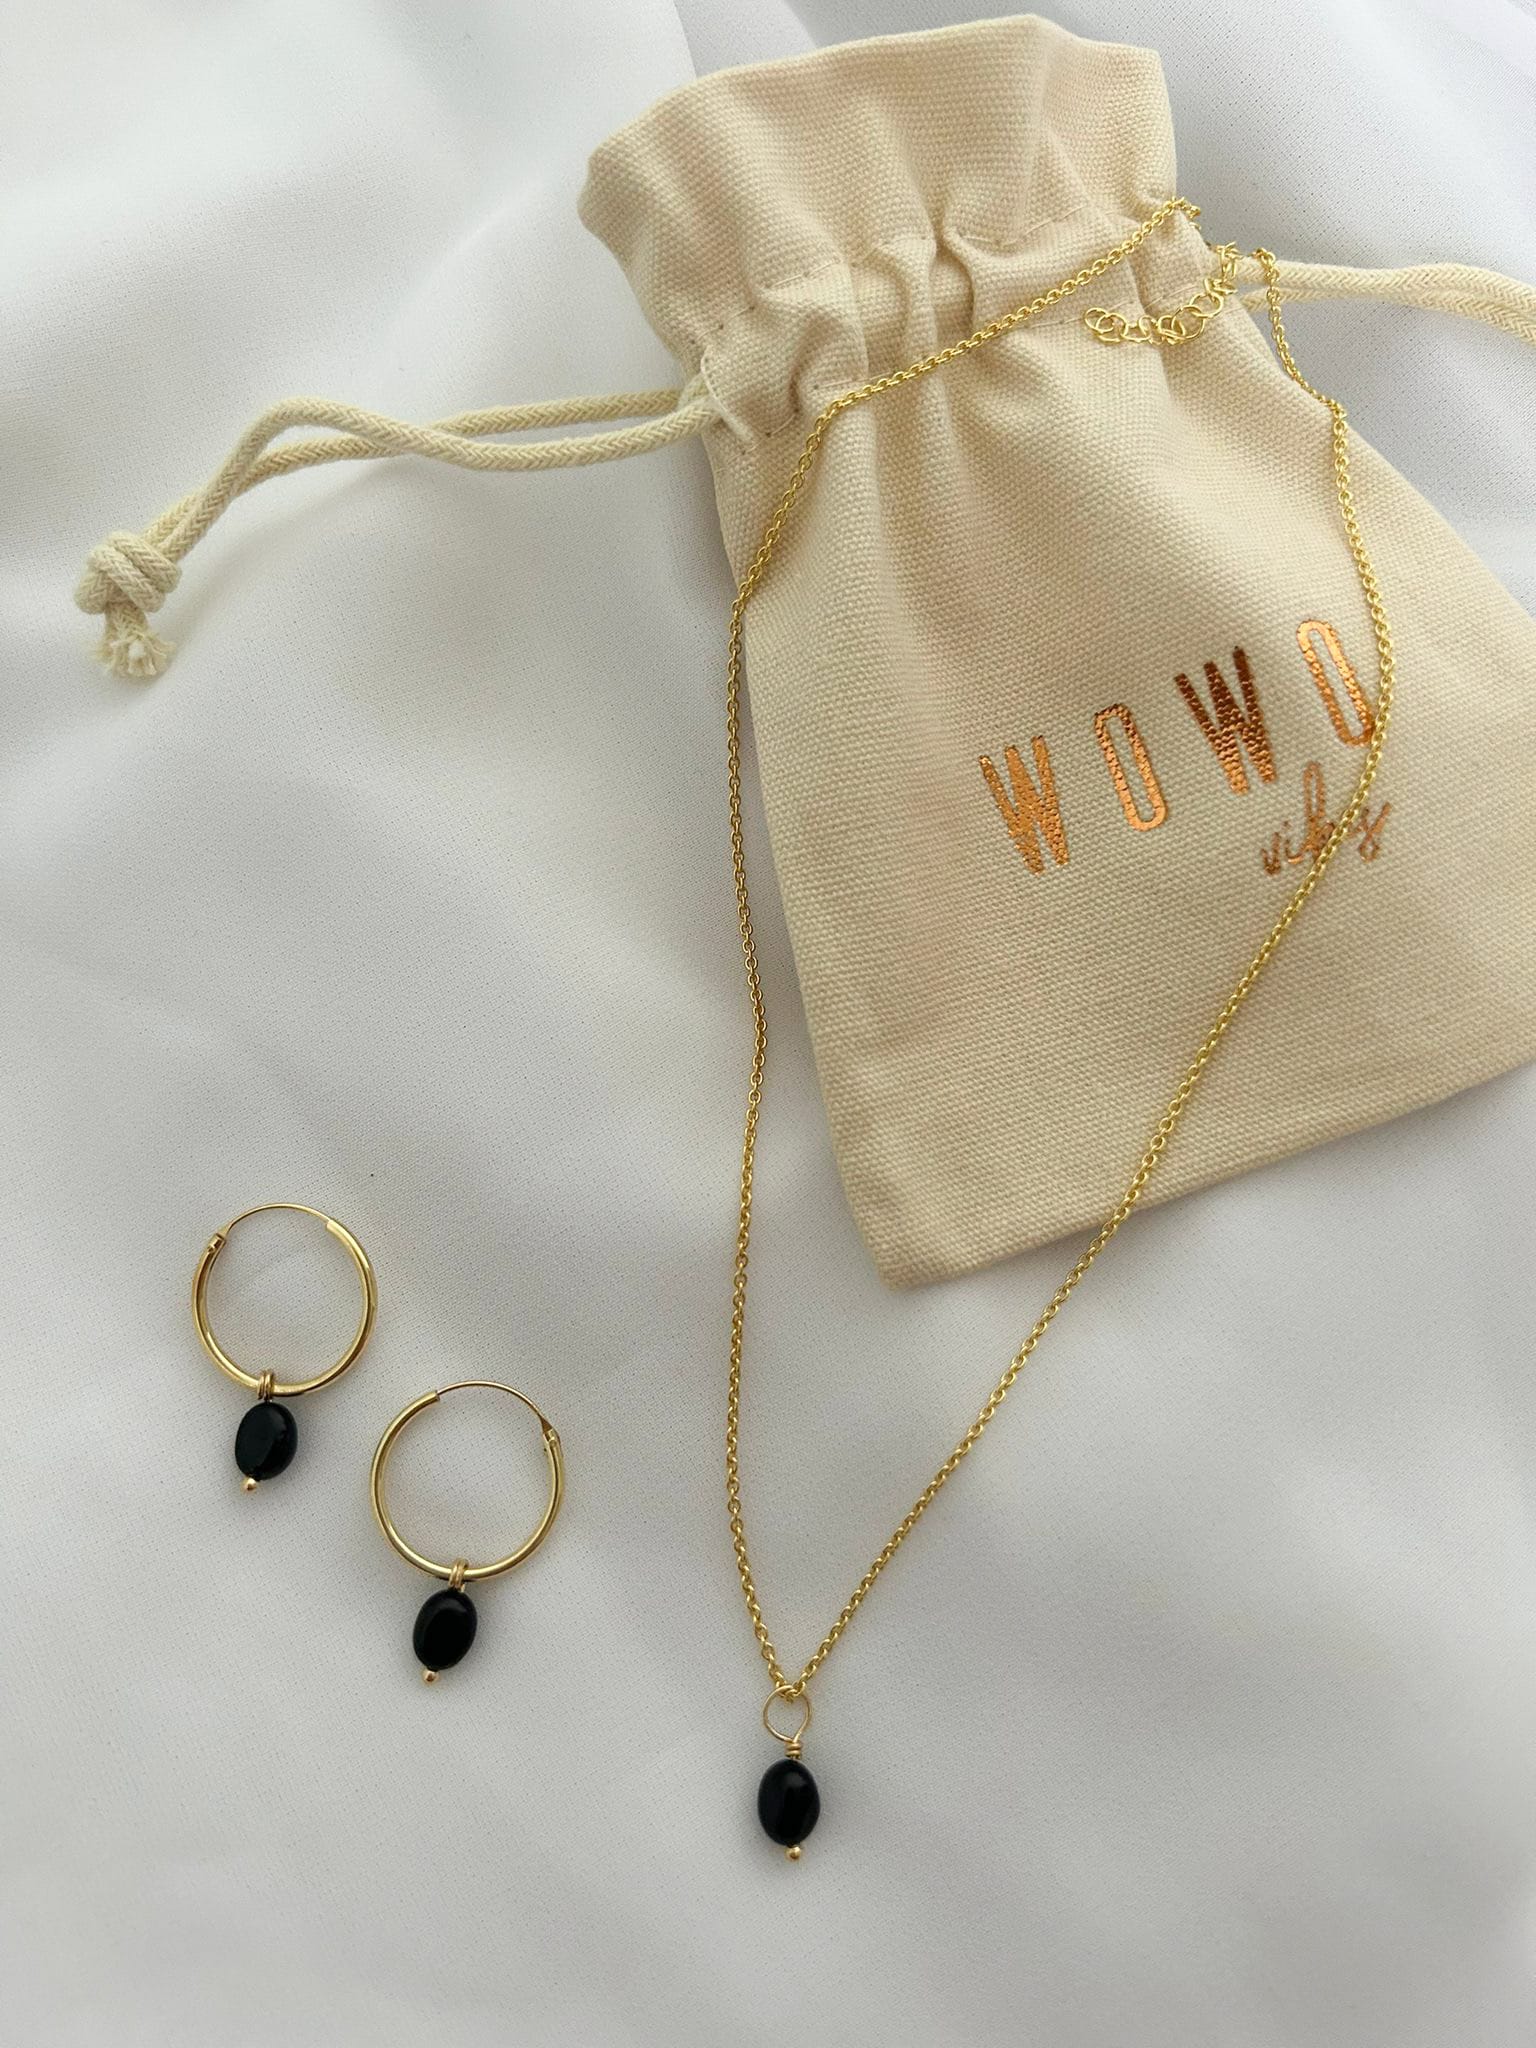 Gift set with gold plated silver earrings and necklace